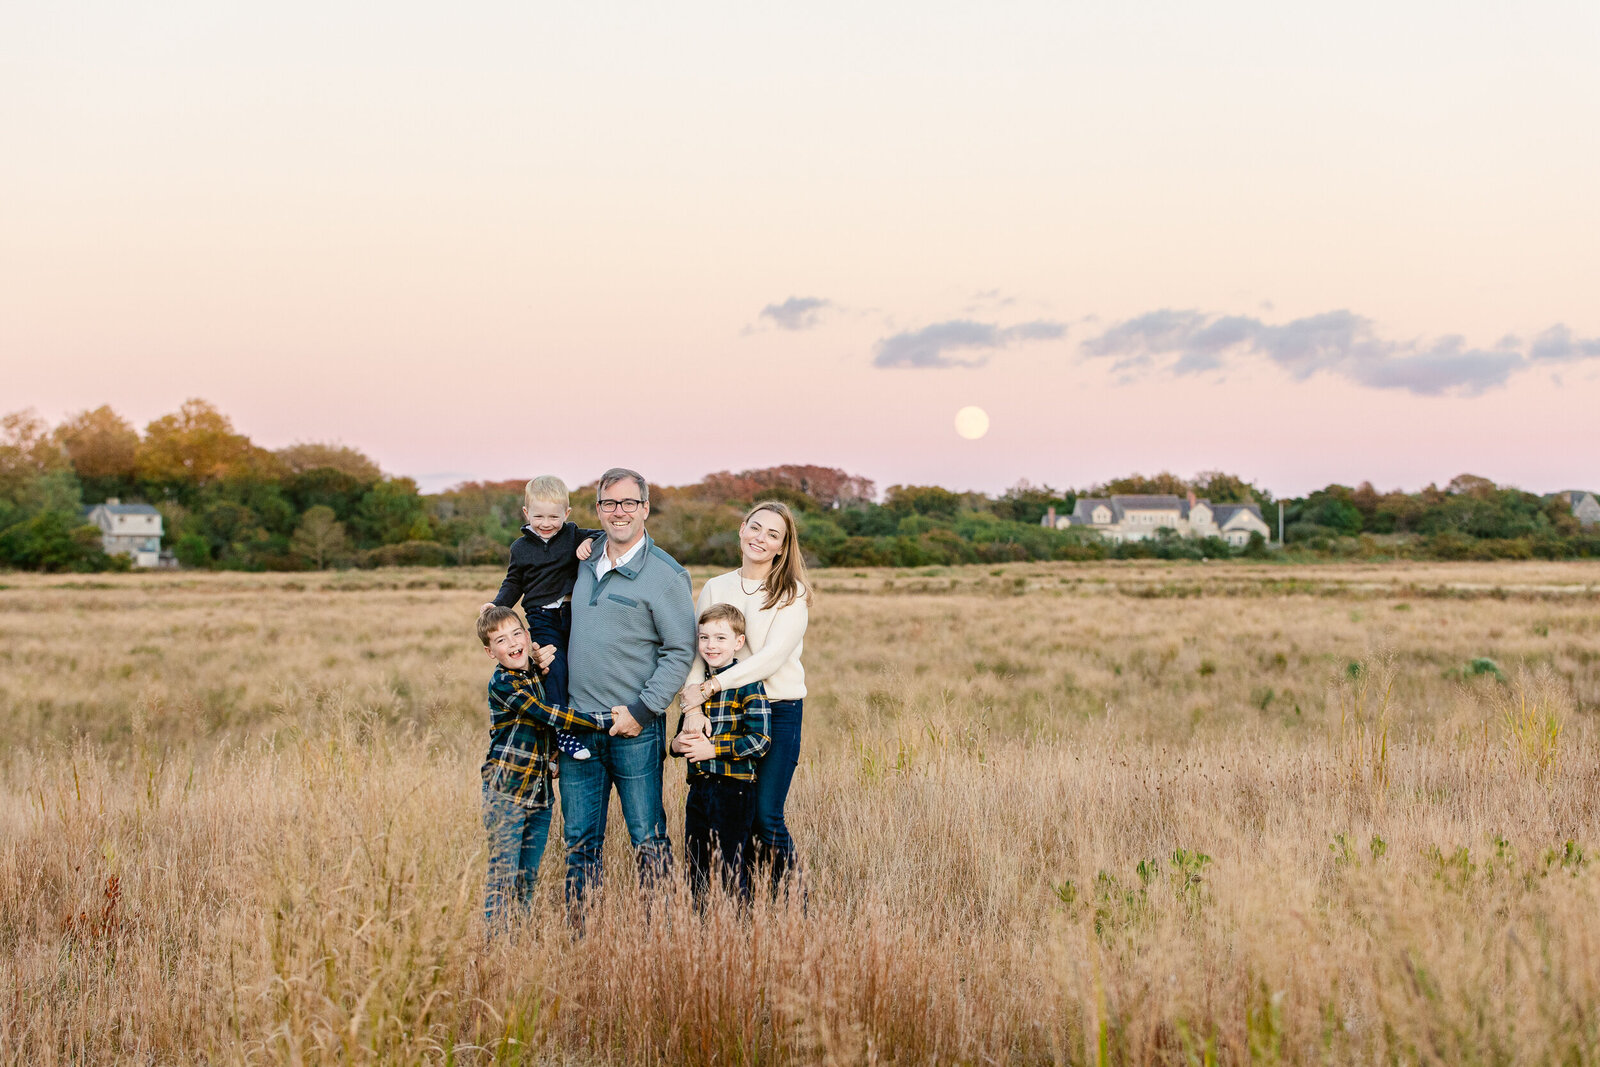 Family in field with full moon